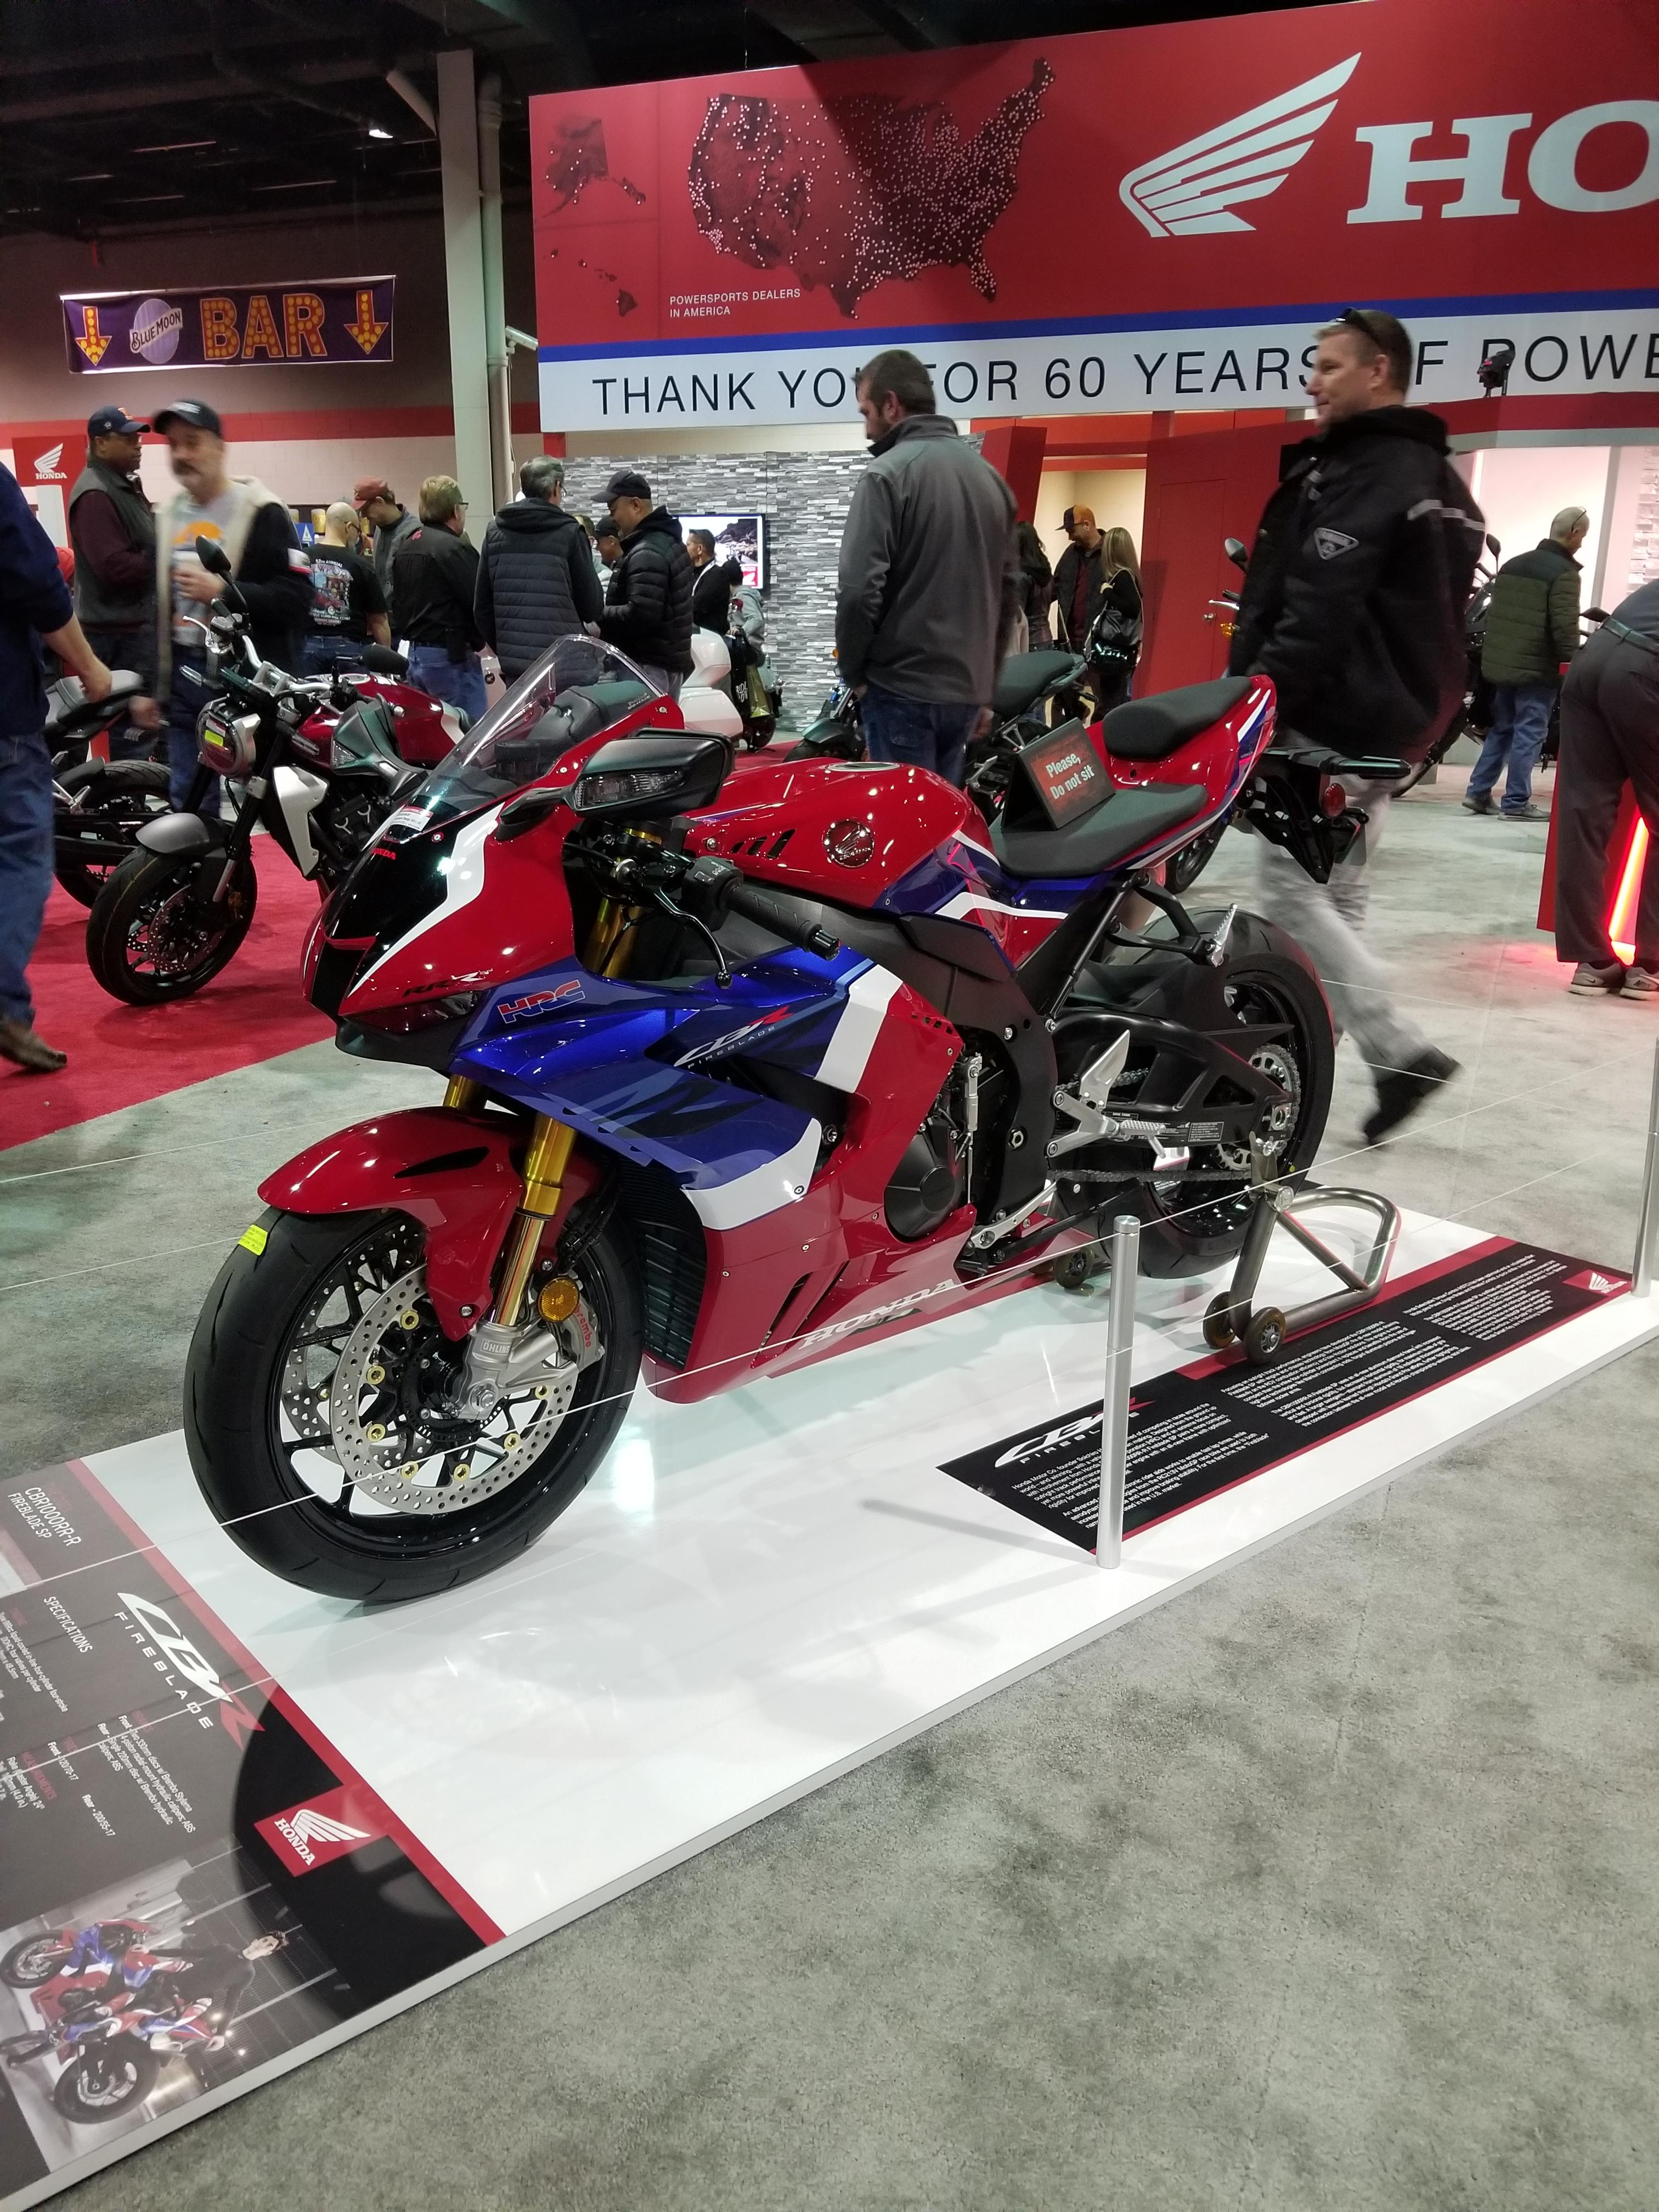 Fireblade at the Chicago motorcycle show Scrolller